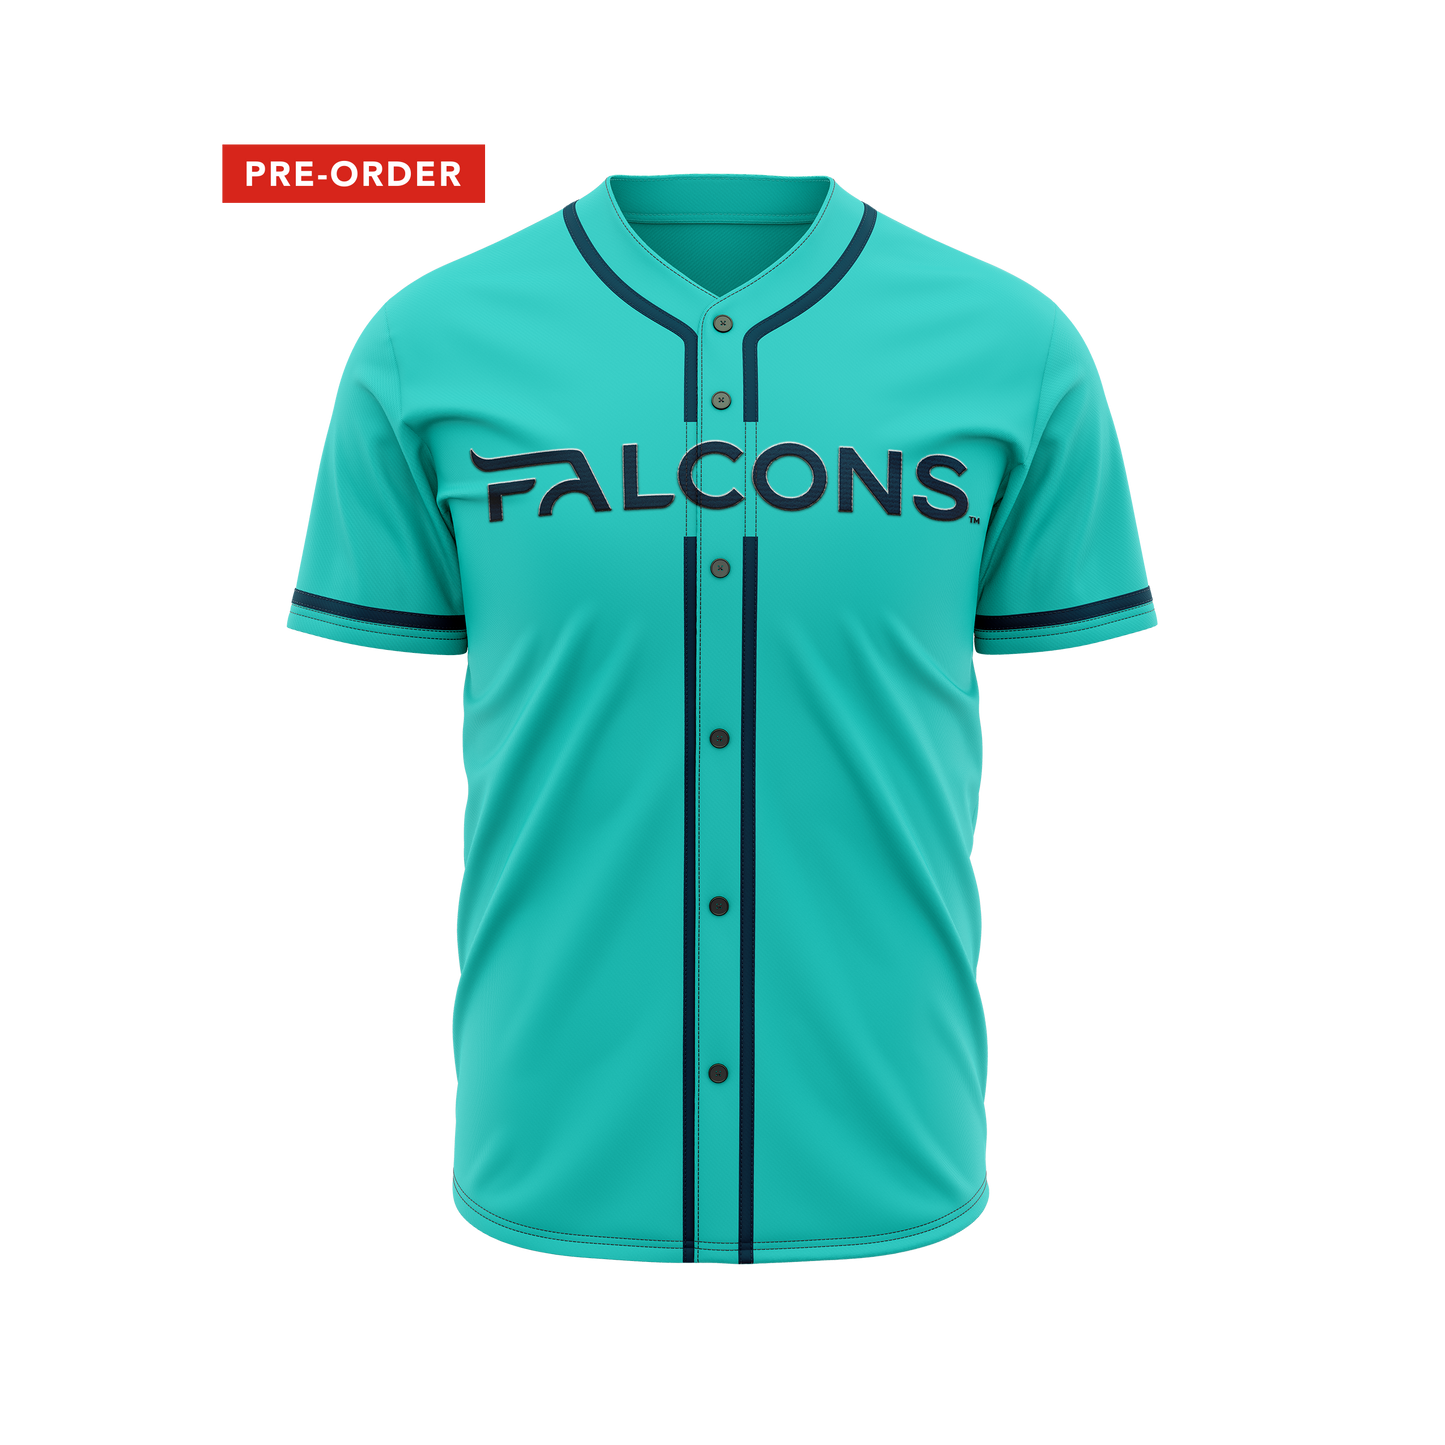 Official Falcons Alternate Jersey